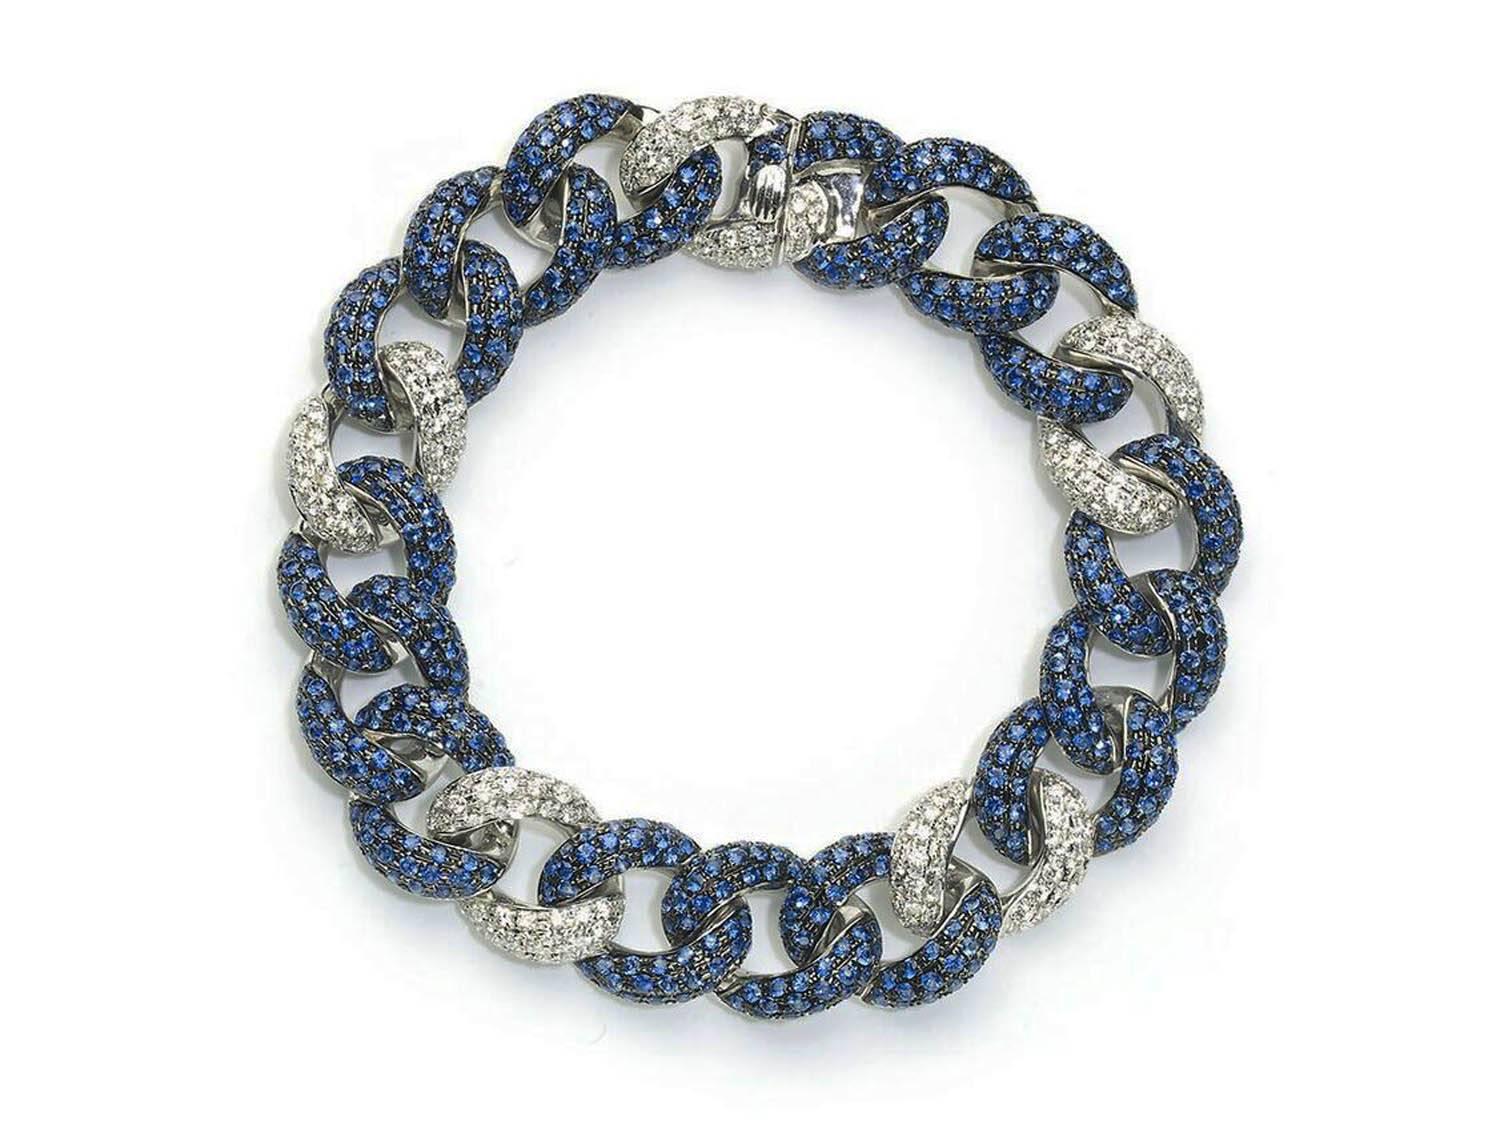 A sapphire and diamond bracelet, of curb link design, with a repeating pattern of three links pavé set with round faceted sapphires weighing an estimated total of 7.97ct and one link of pavé set round brilliant-cut diamonds weighing an estimated